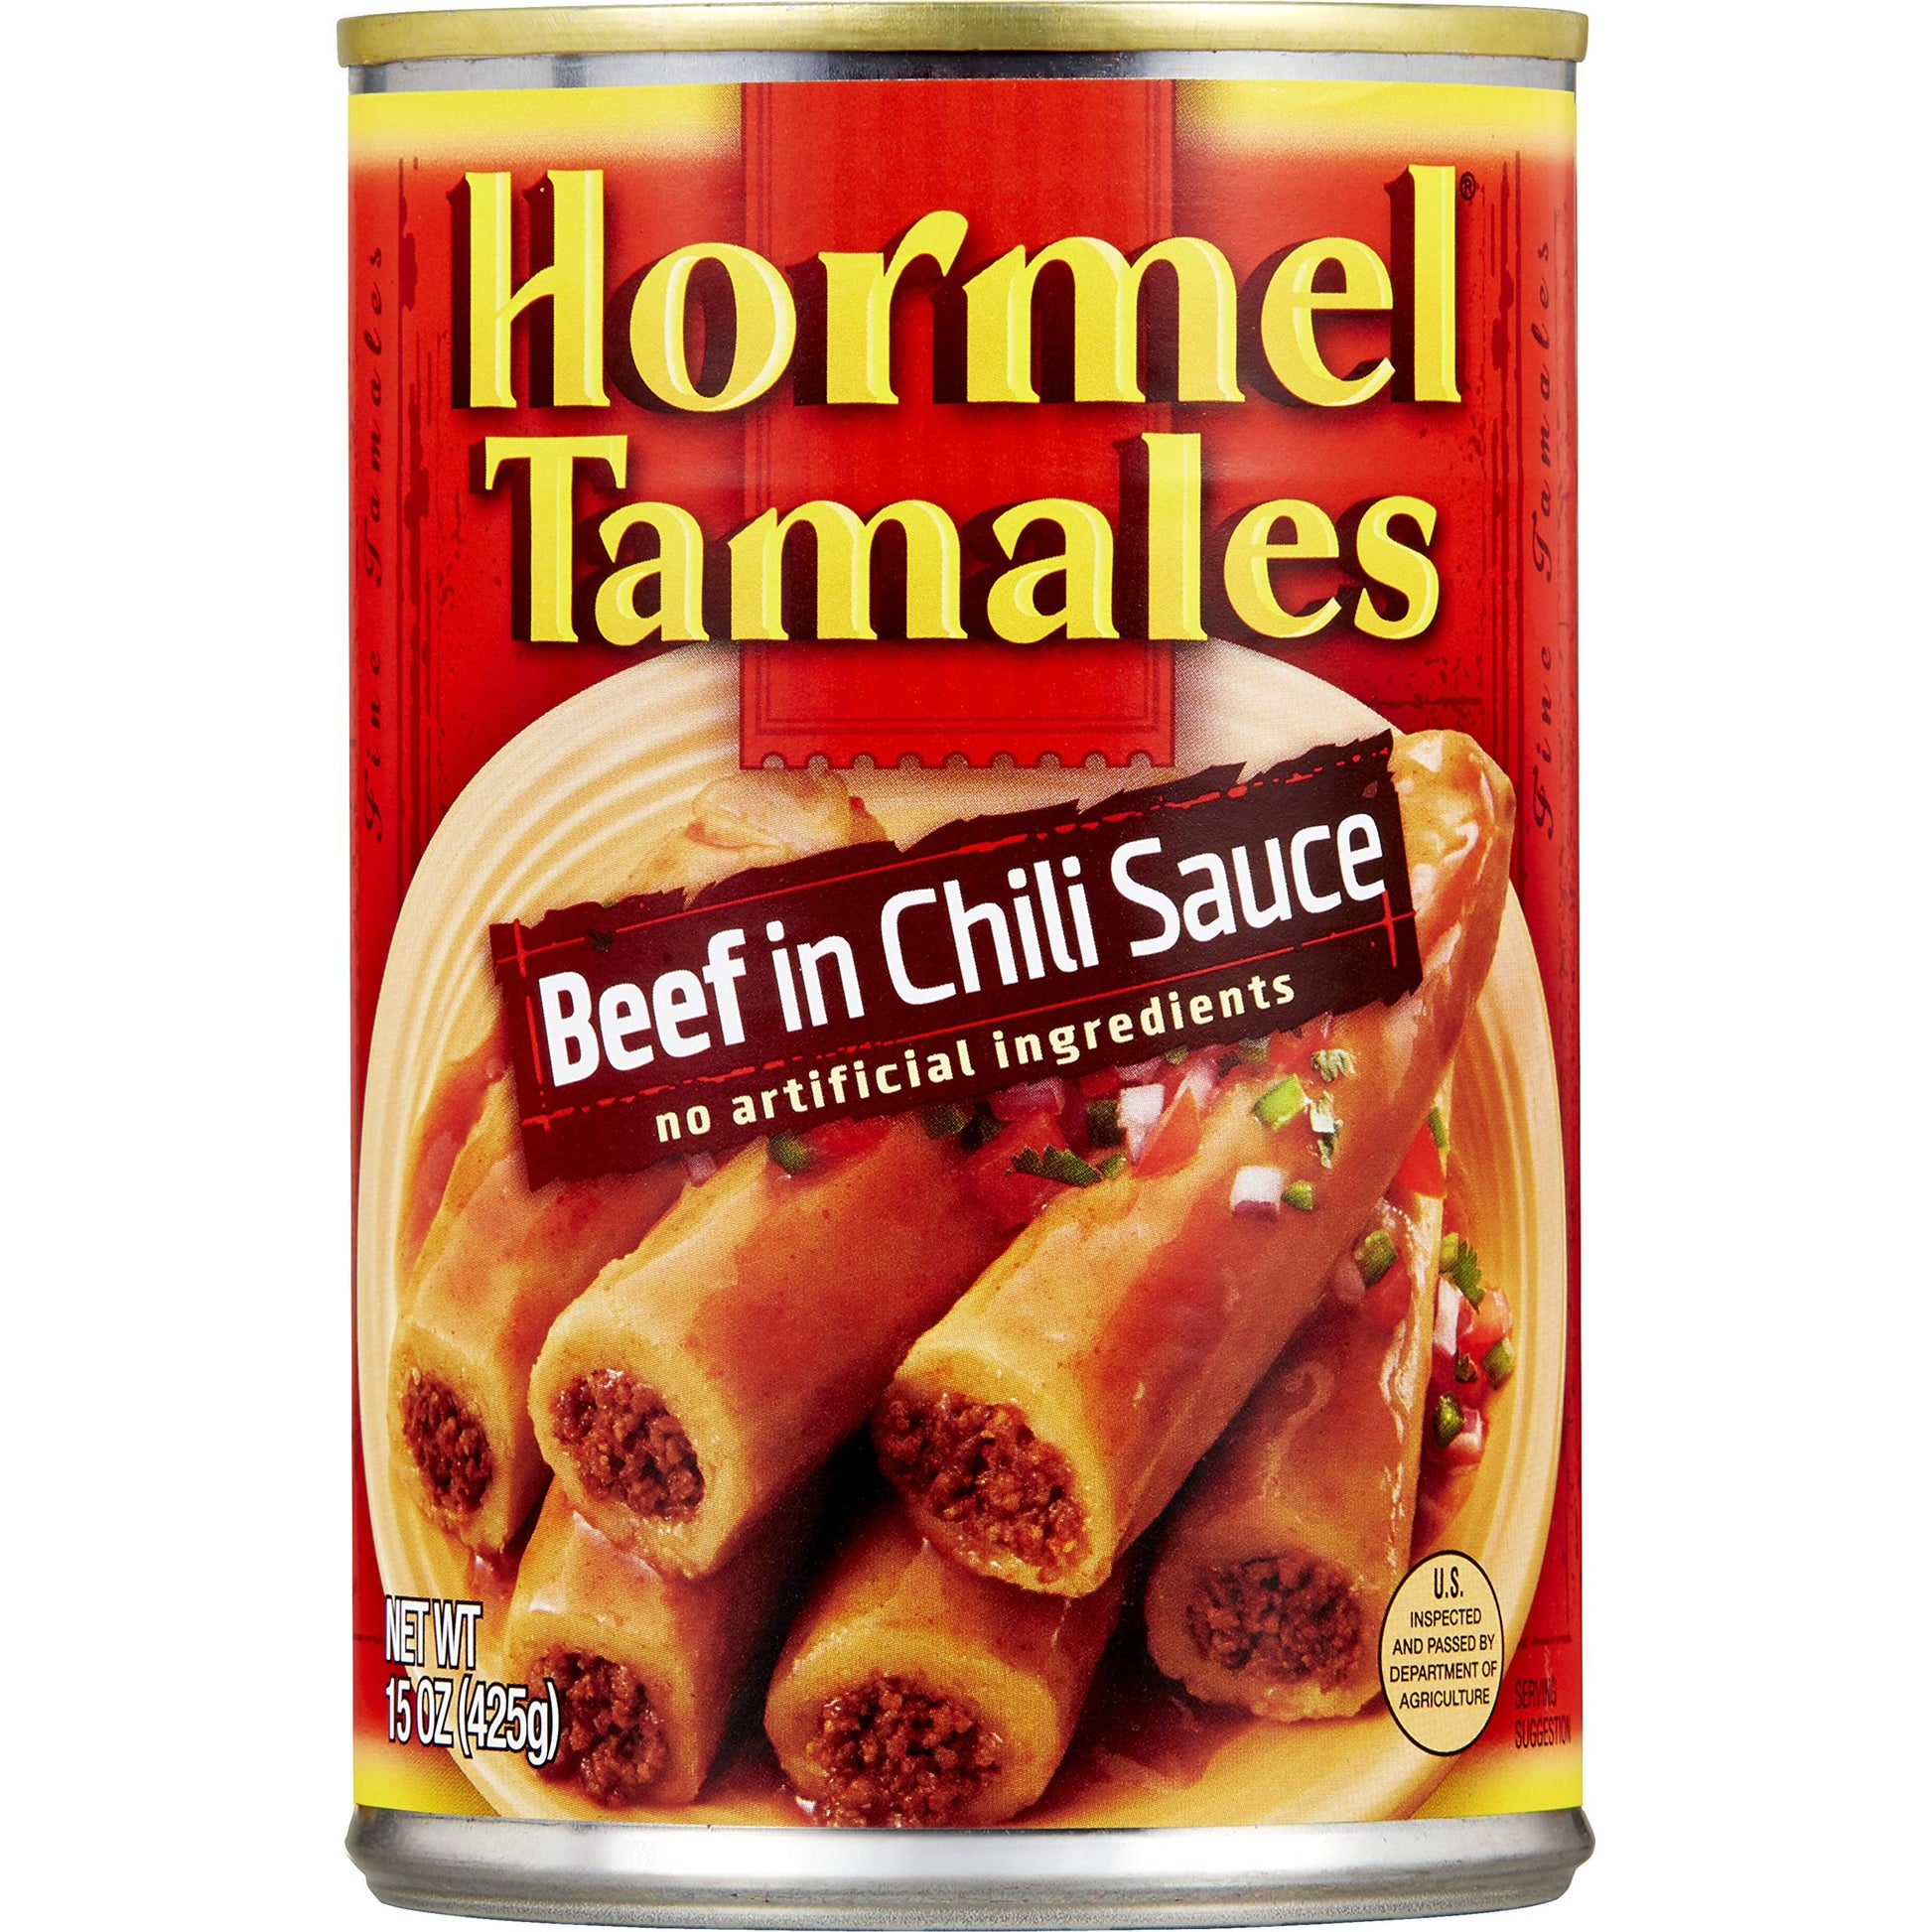 Hormel Tamales Beef in Chili Sauce 15oz 12 Count